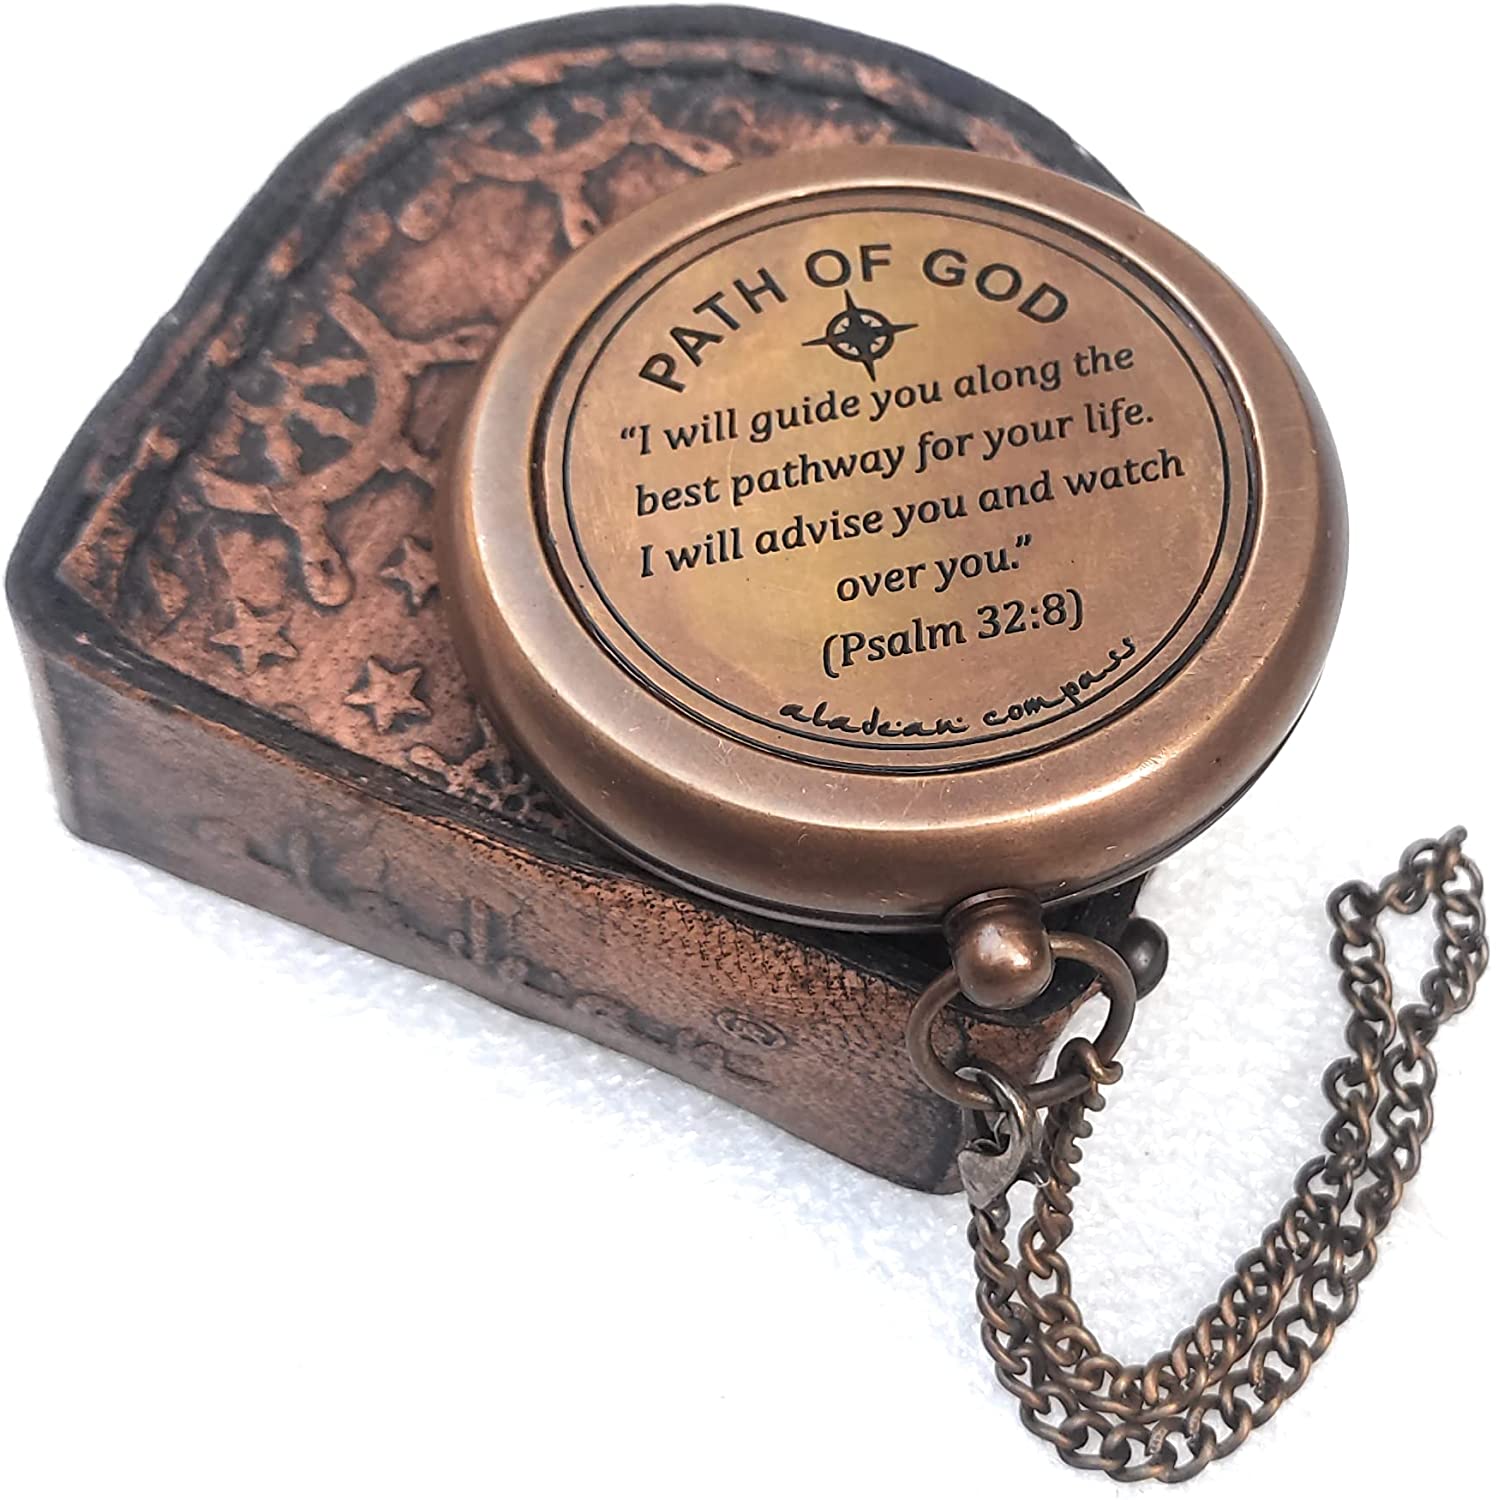 God's Providence Compass - Christian Gifts for Men, Catholic Gifts, Baptism  Gifts for Boys, Gifts for Teen Boys, Graduation Gifts, Inspirational Gifts